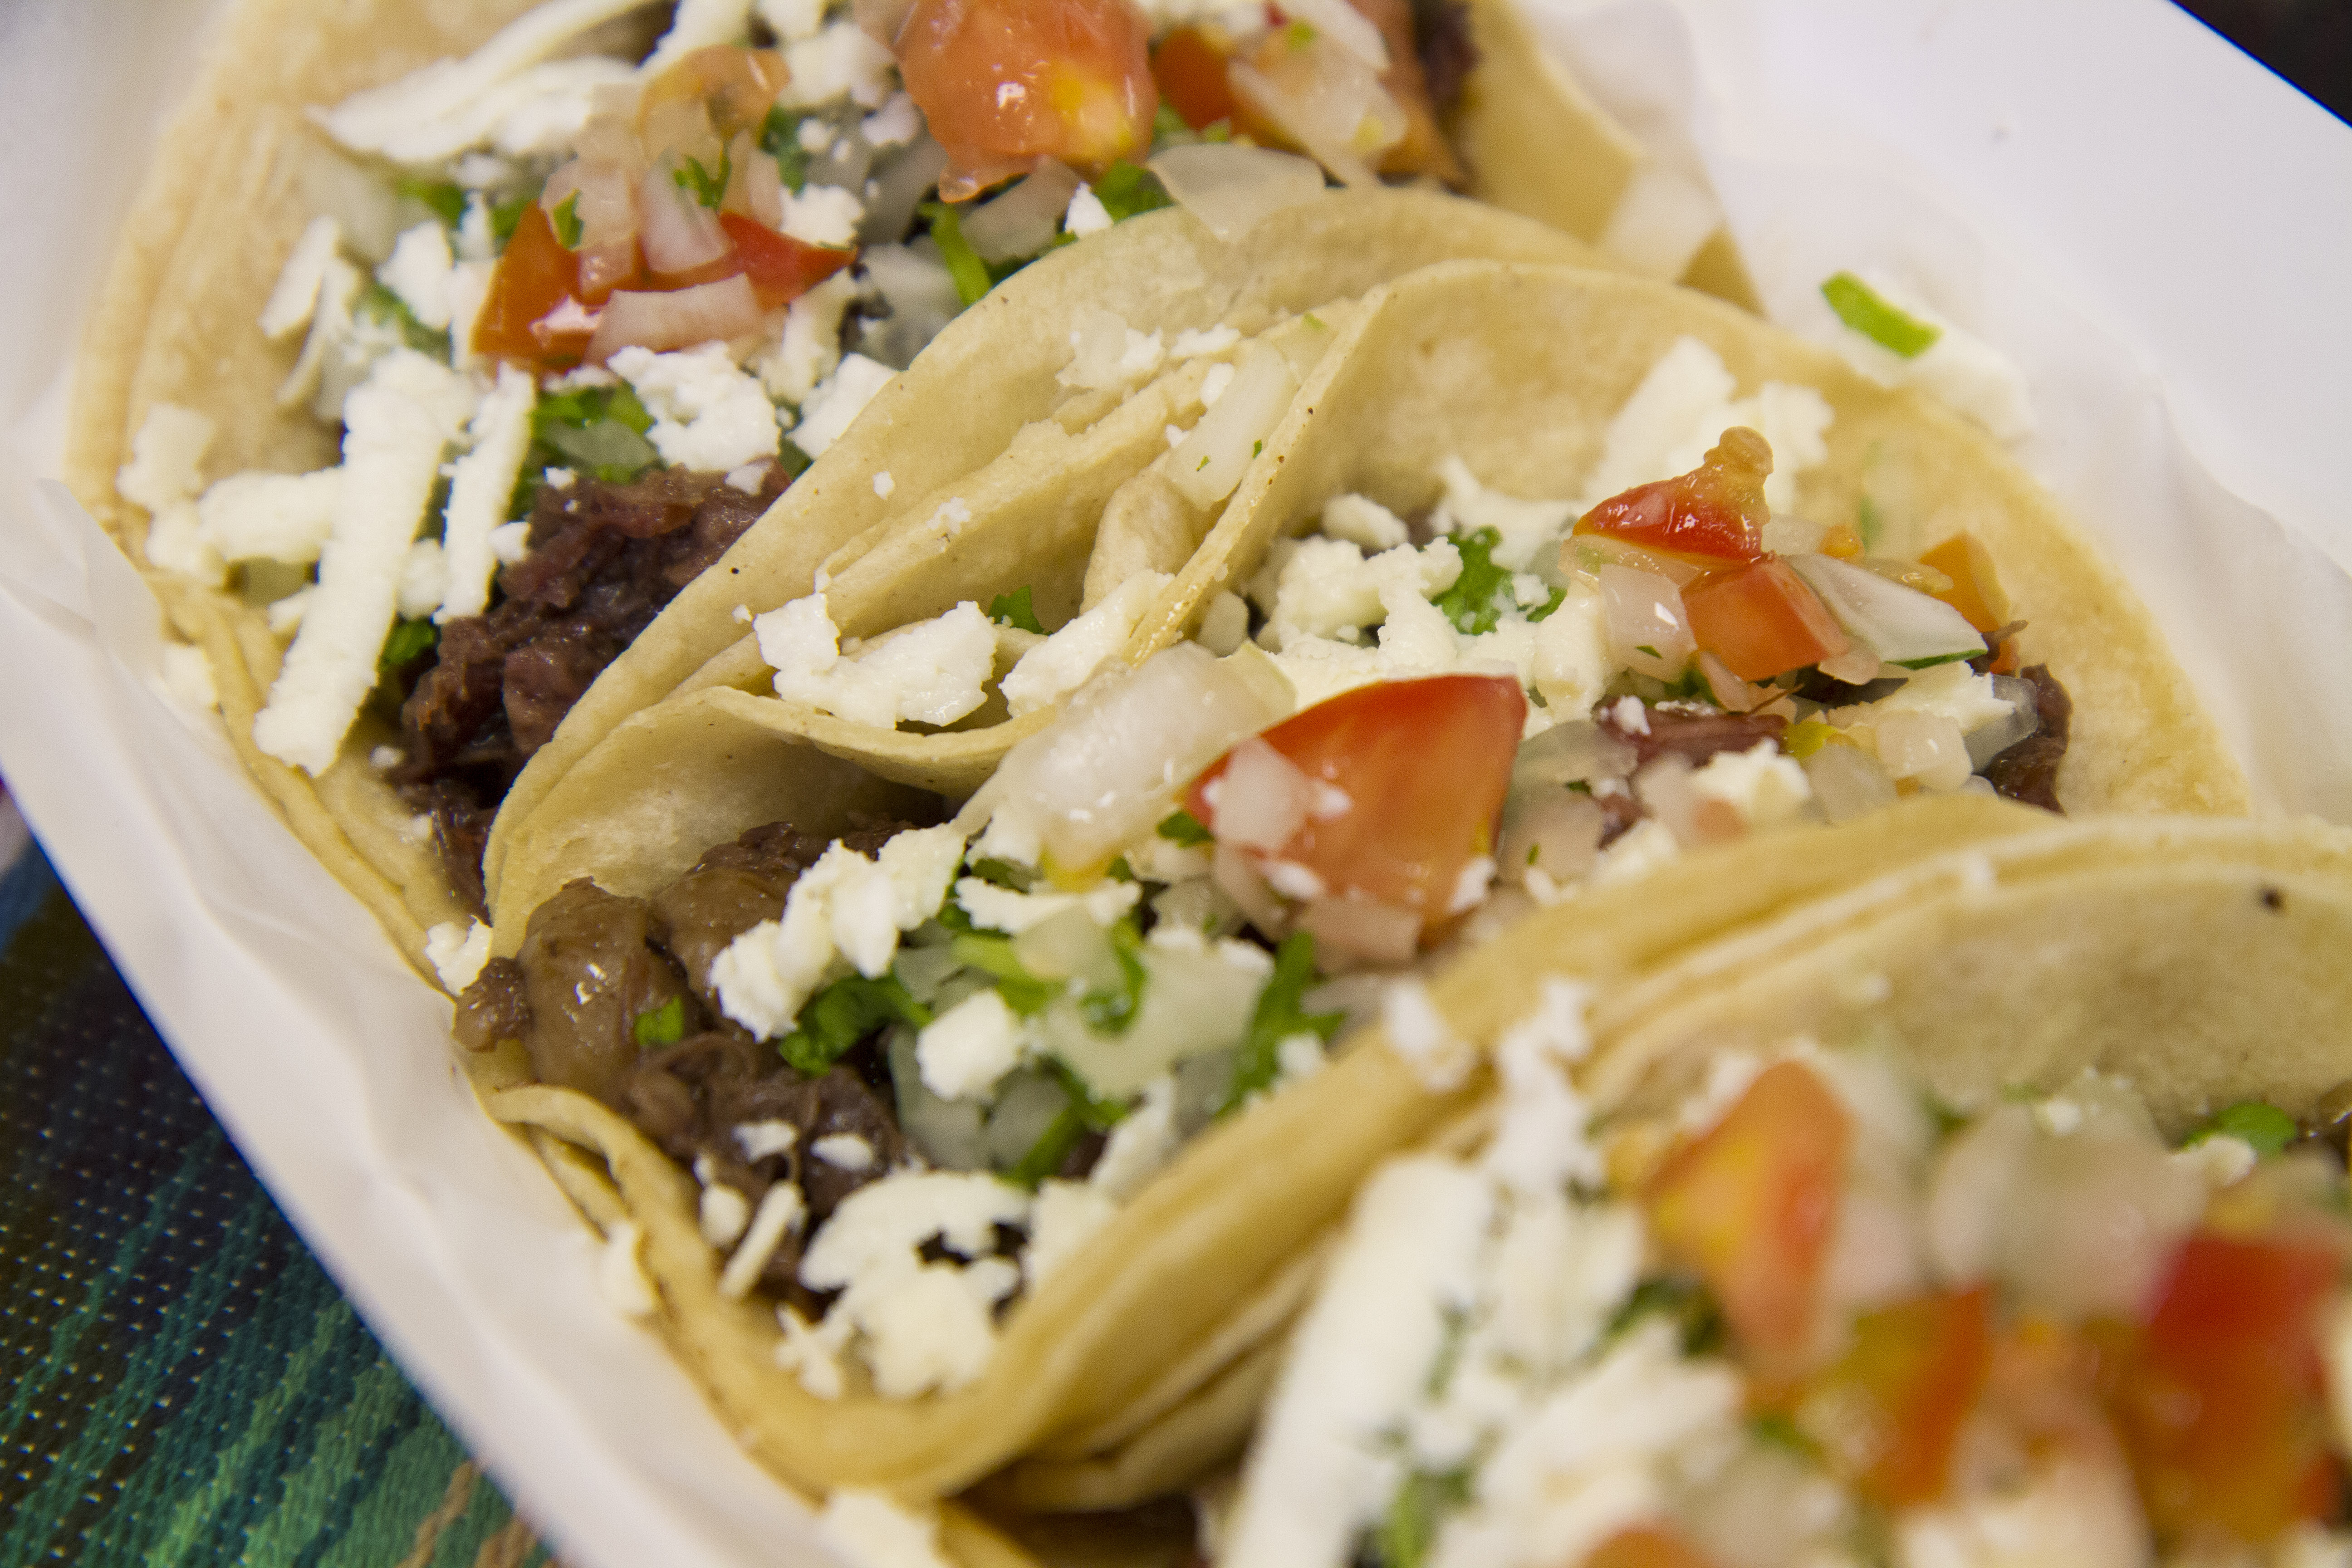 Fast Break: Find authentic street tacos at Mr. Taco Cantina